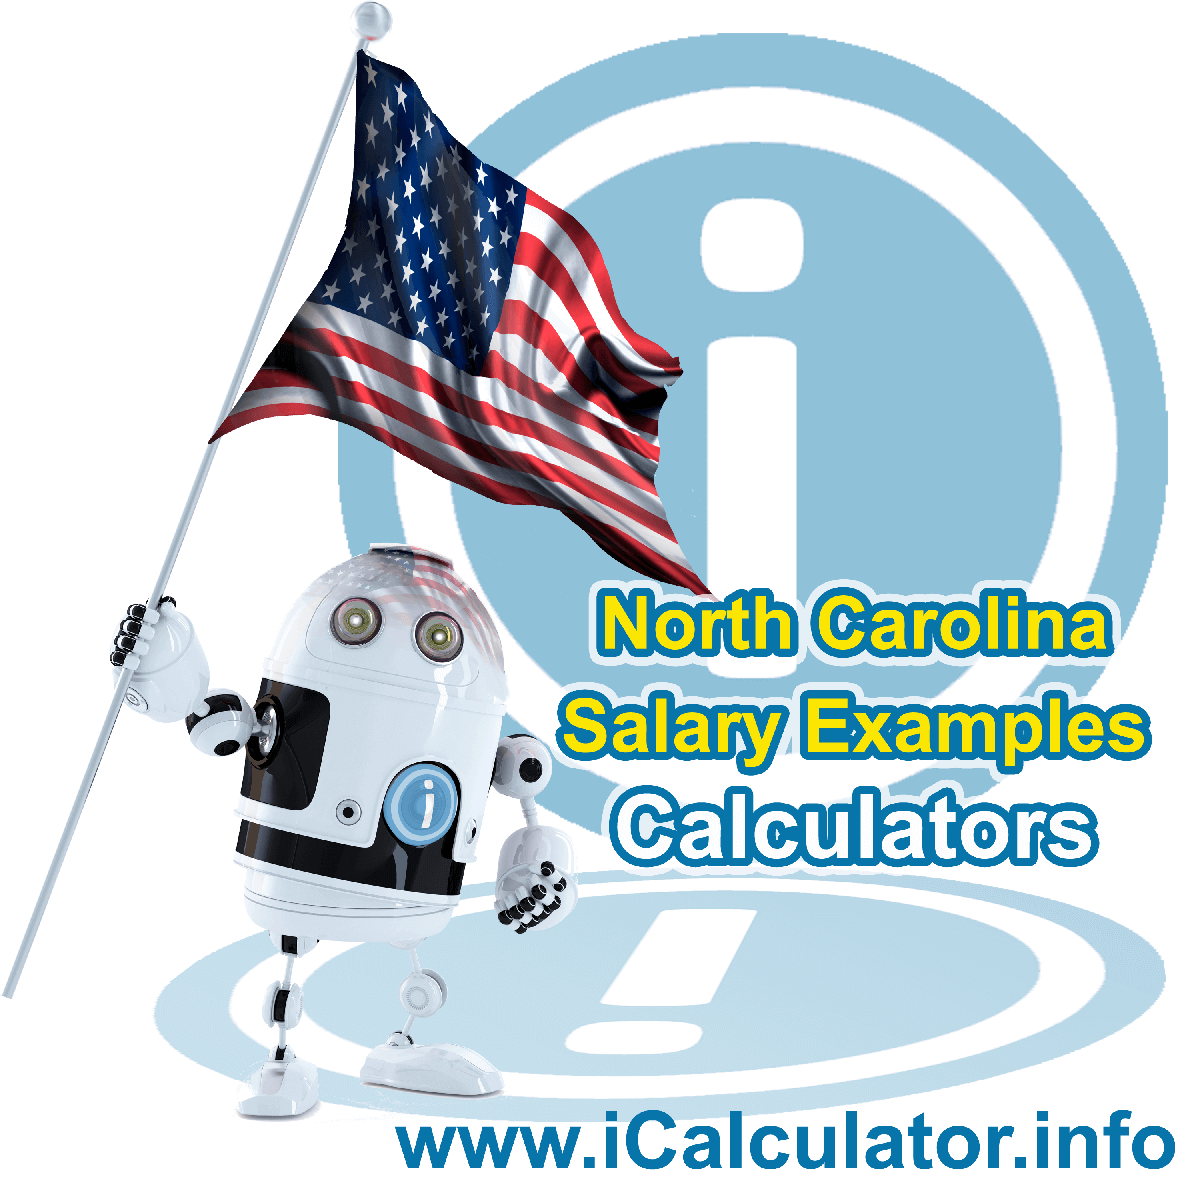 North Carolina Salary Example for $ 80,000.00 in 2023 | iCalculator™ | $ 80,000.00 salary example for employee and employer paying North Carolina State tincome taxes. Detailed salary after tax calculation including North Carolina State Tax, Federal State Tax, Medicare Deductions, Social Security, Capital Gains and other income tax and salary deductions complete with supporting North Carolina state tax tables 